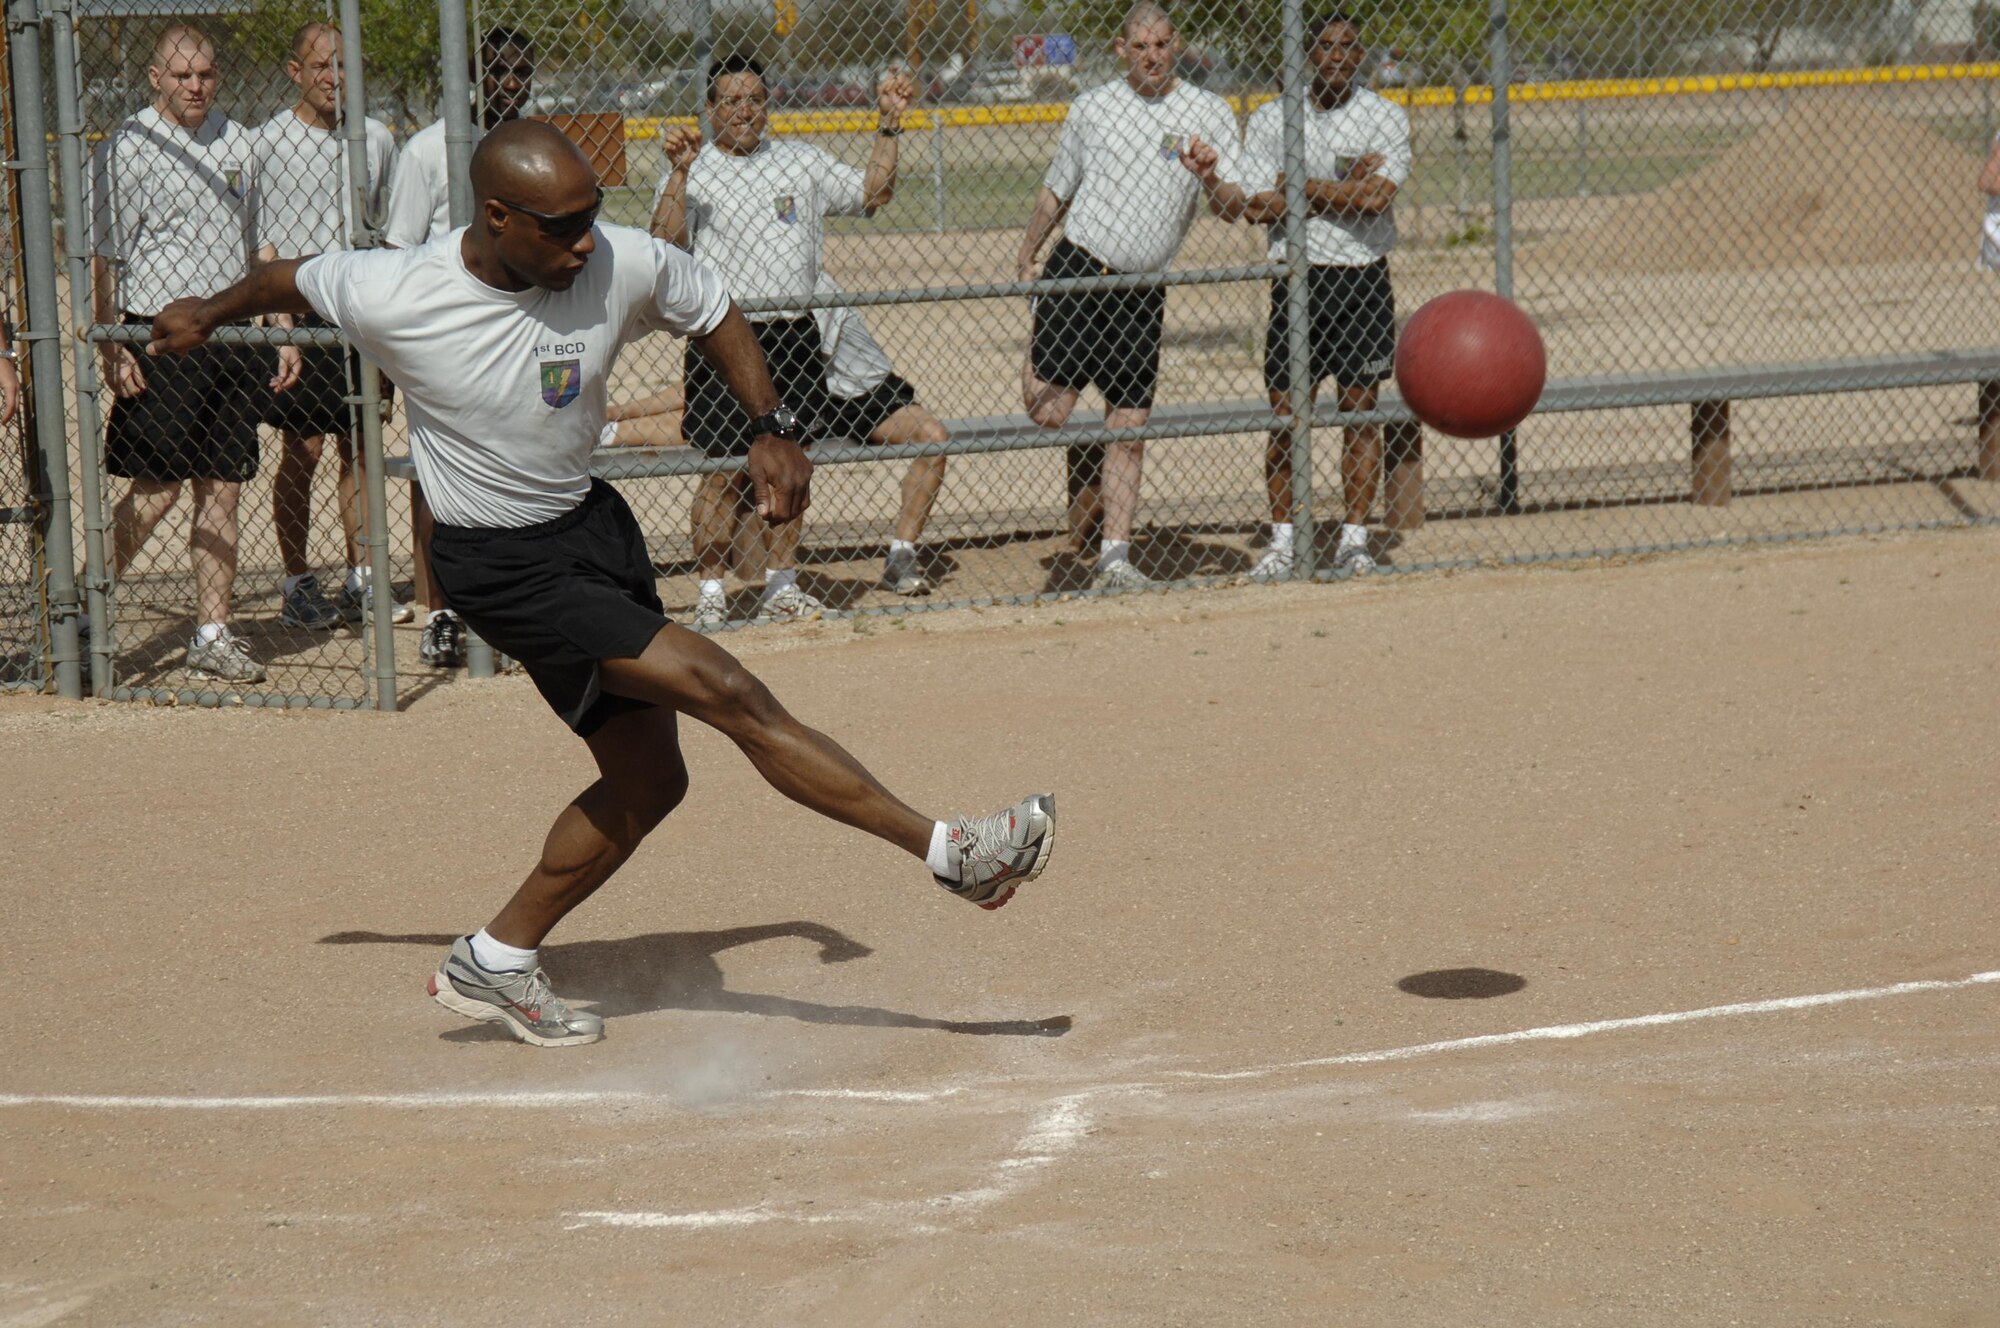 DAVIS-MONTHAN AIR FORCE BASE, Ariz. -- Sergeant Shawn Swindall, 1st Battlefield Coordination Detachment, sends the ball flying during the kickball competition of the 12th Air Force (Air Forces Southern) sports day March 20.  This is the first time 1st BCD has had enough manpower to field a full team, and they won first place at the end of the day. More than 200 members of 12th AF competed in the event. (U.S. Air Force photo by Tech. Sgt. Eric Petosky) 
